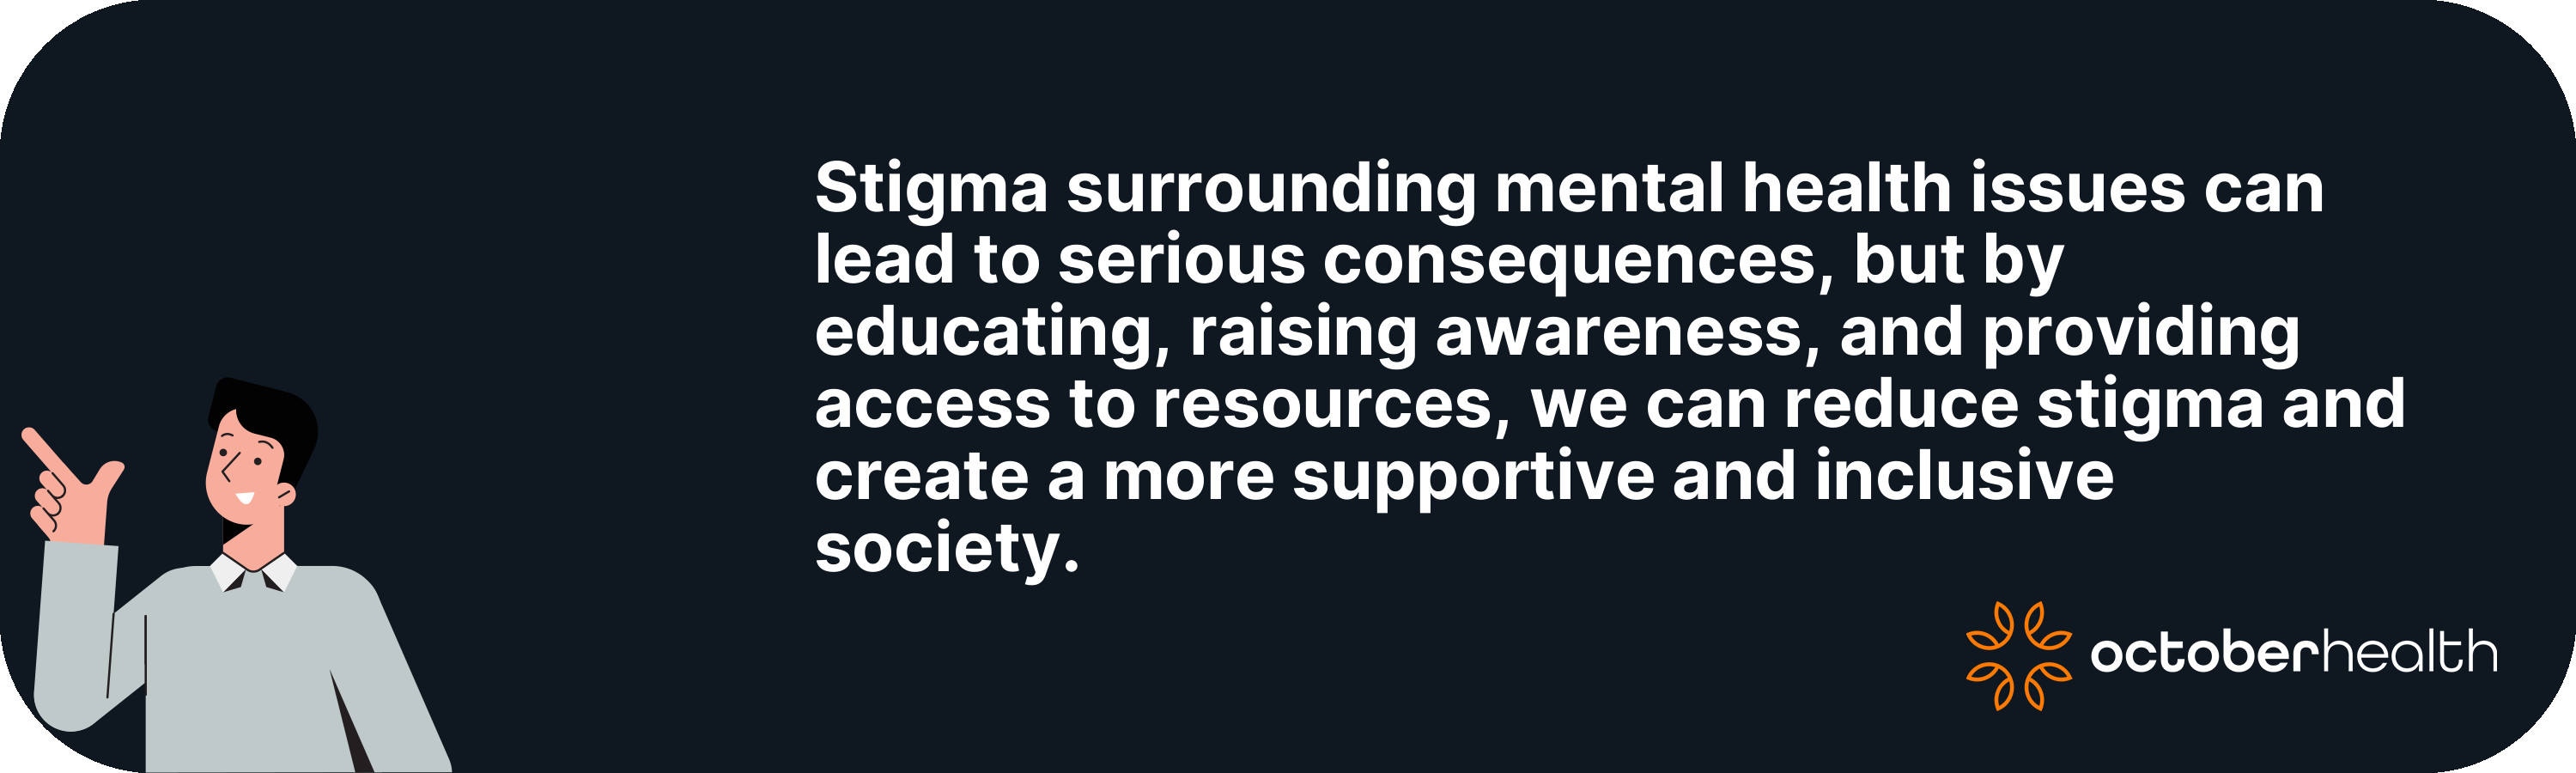 Stigma surrounding mental health issues can...